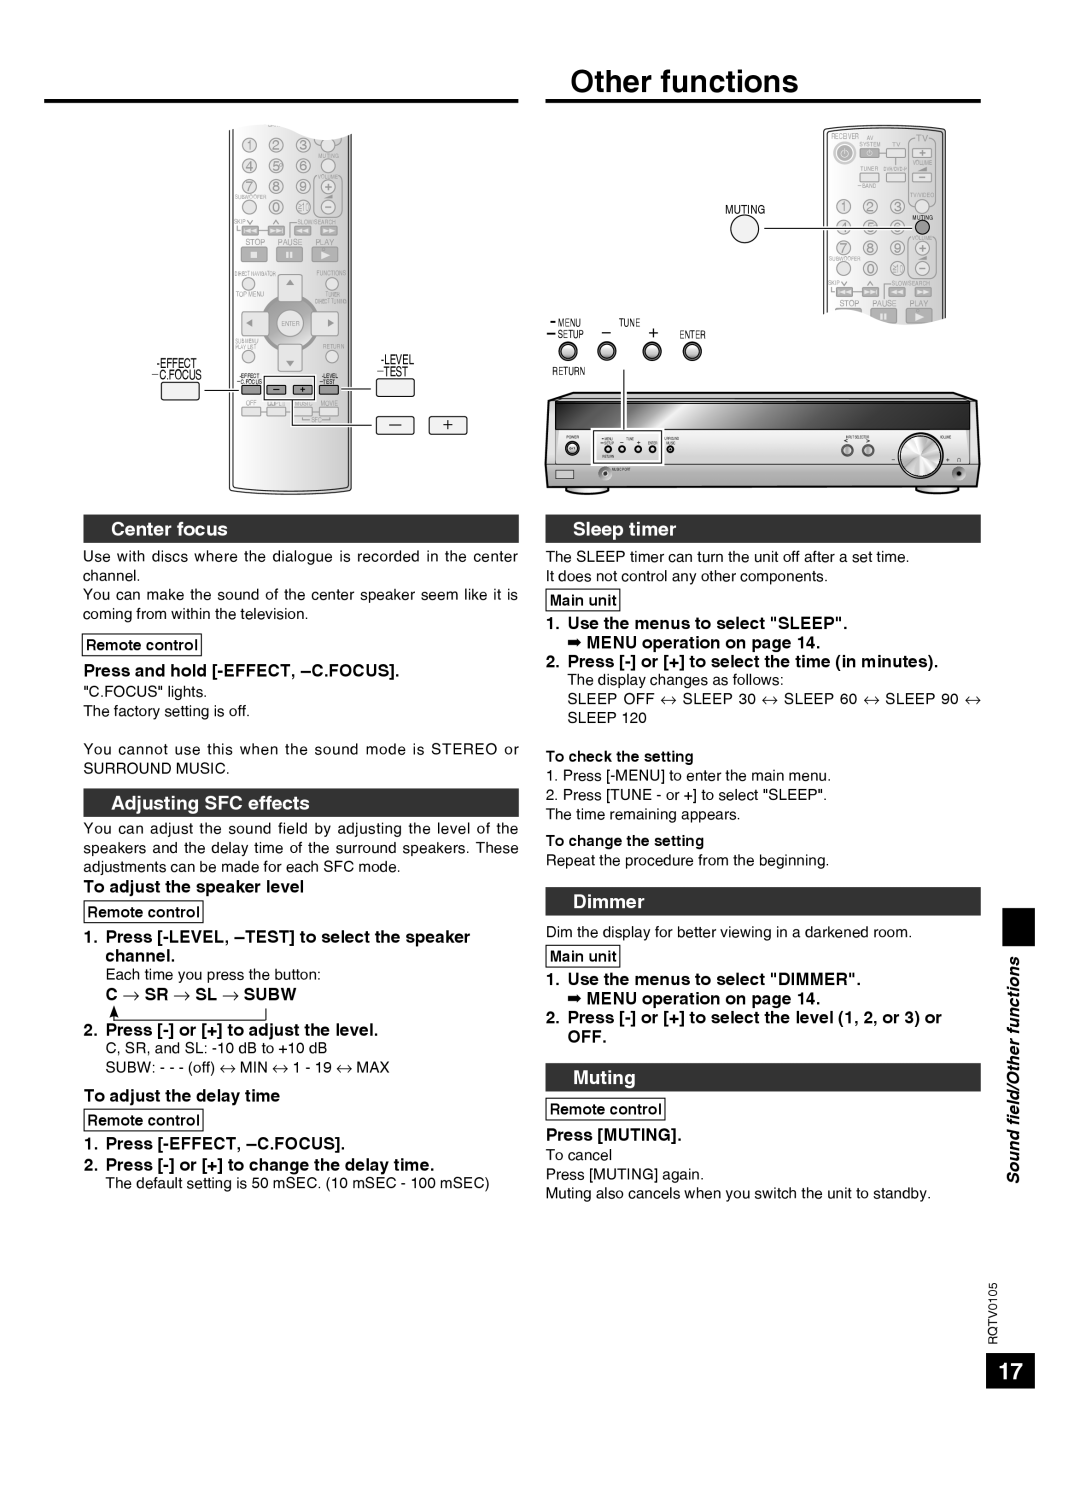 Panasonic SC-HT40 specifications Other functions, Center focus, Adjusting SFC effects, Sleep timer, Dimmer, Muting, Sound 